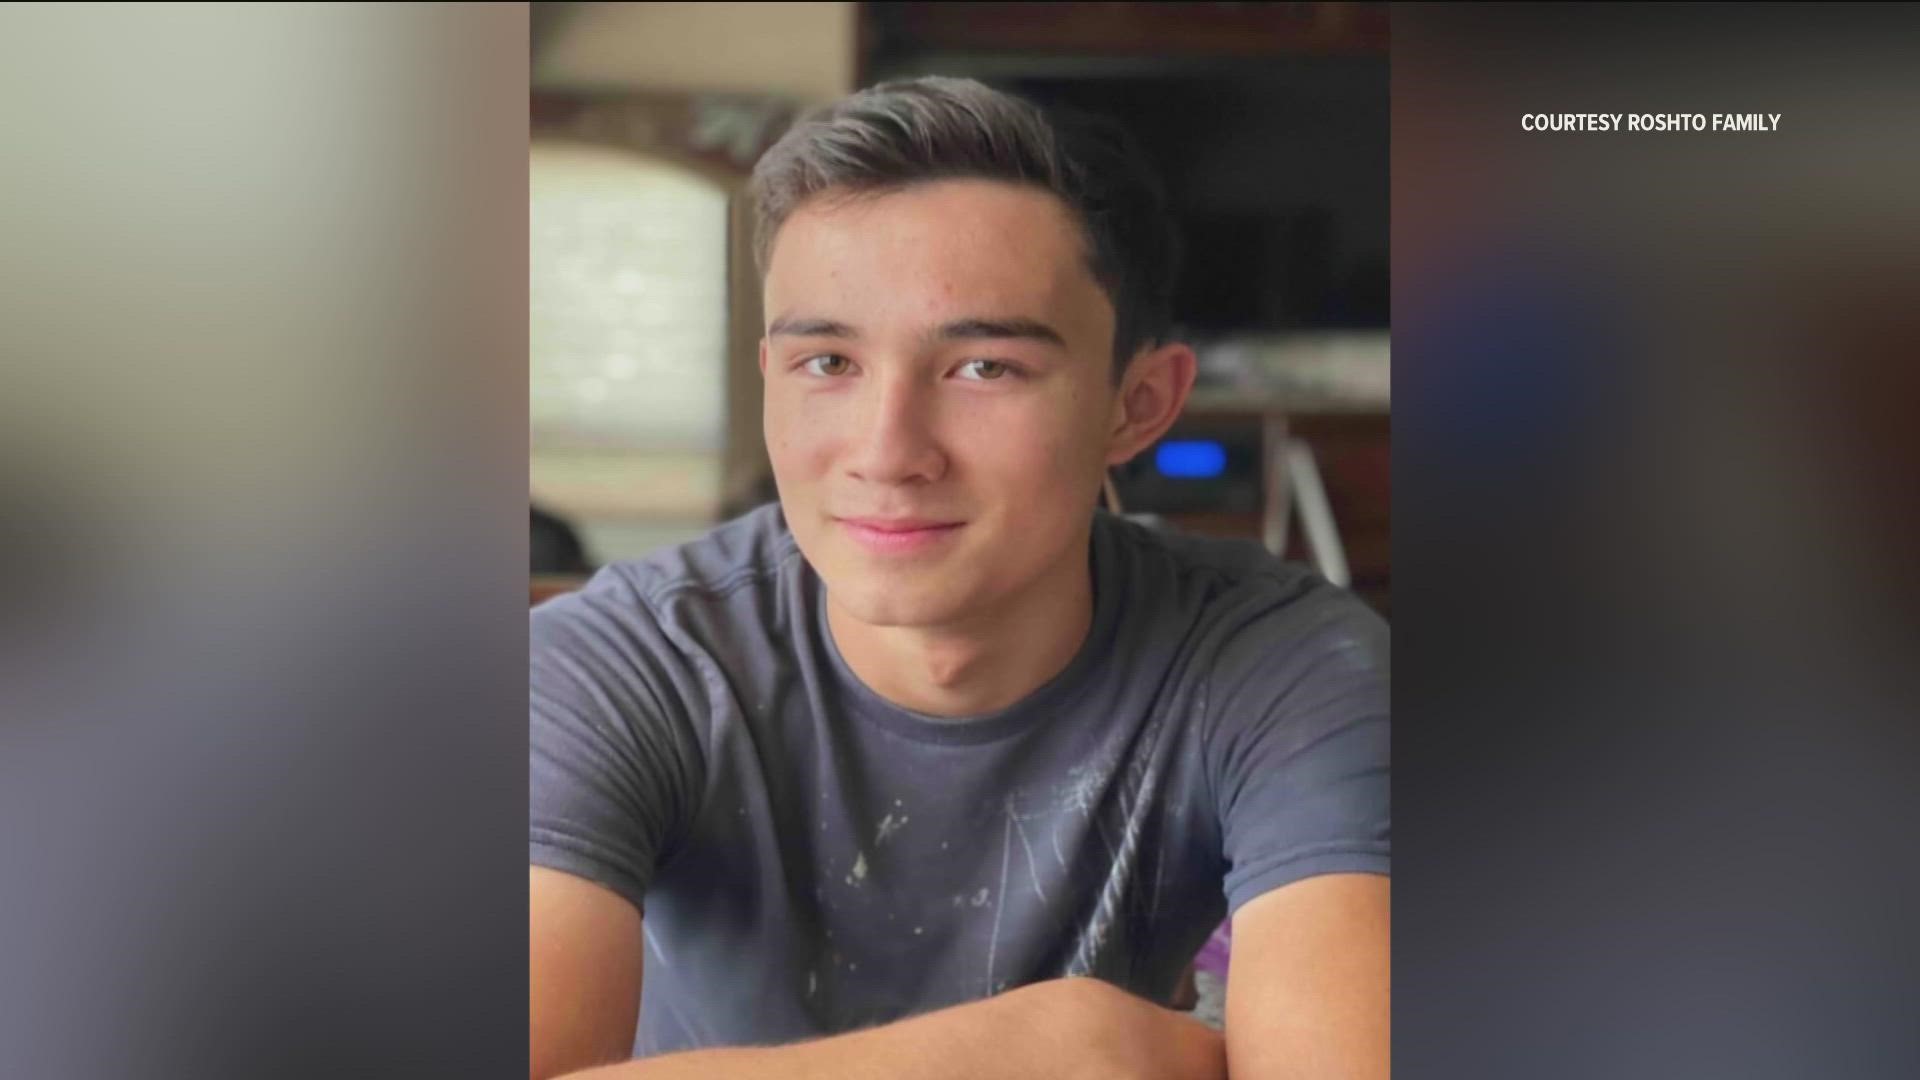 Nicolas Rochto is a senior at Meridian High School. He was recently in a terrible motorcycle accident and ended up losing both his lower legs and breaking his back.